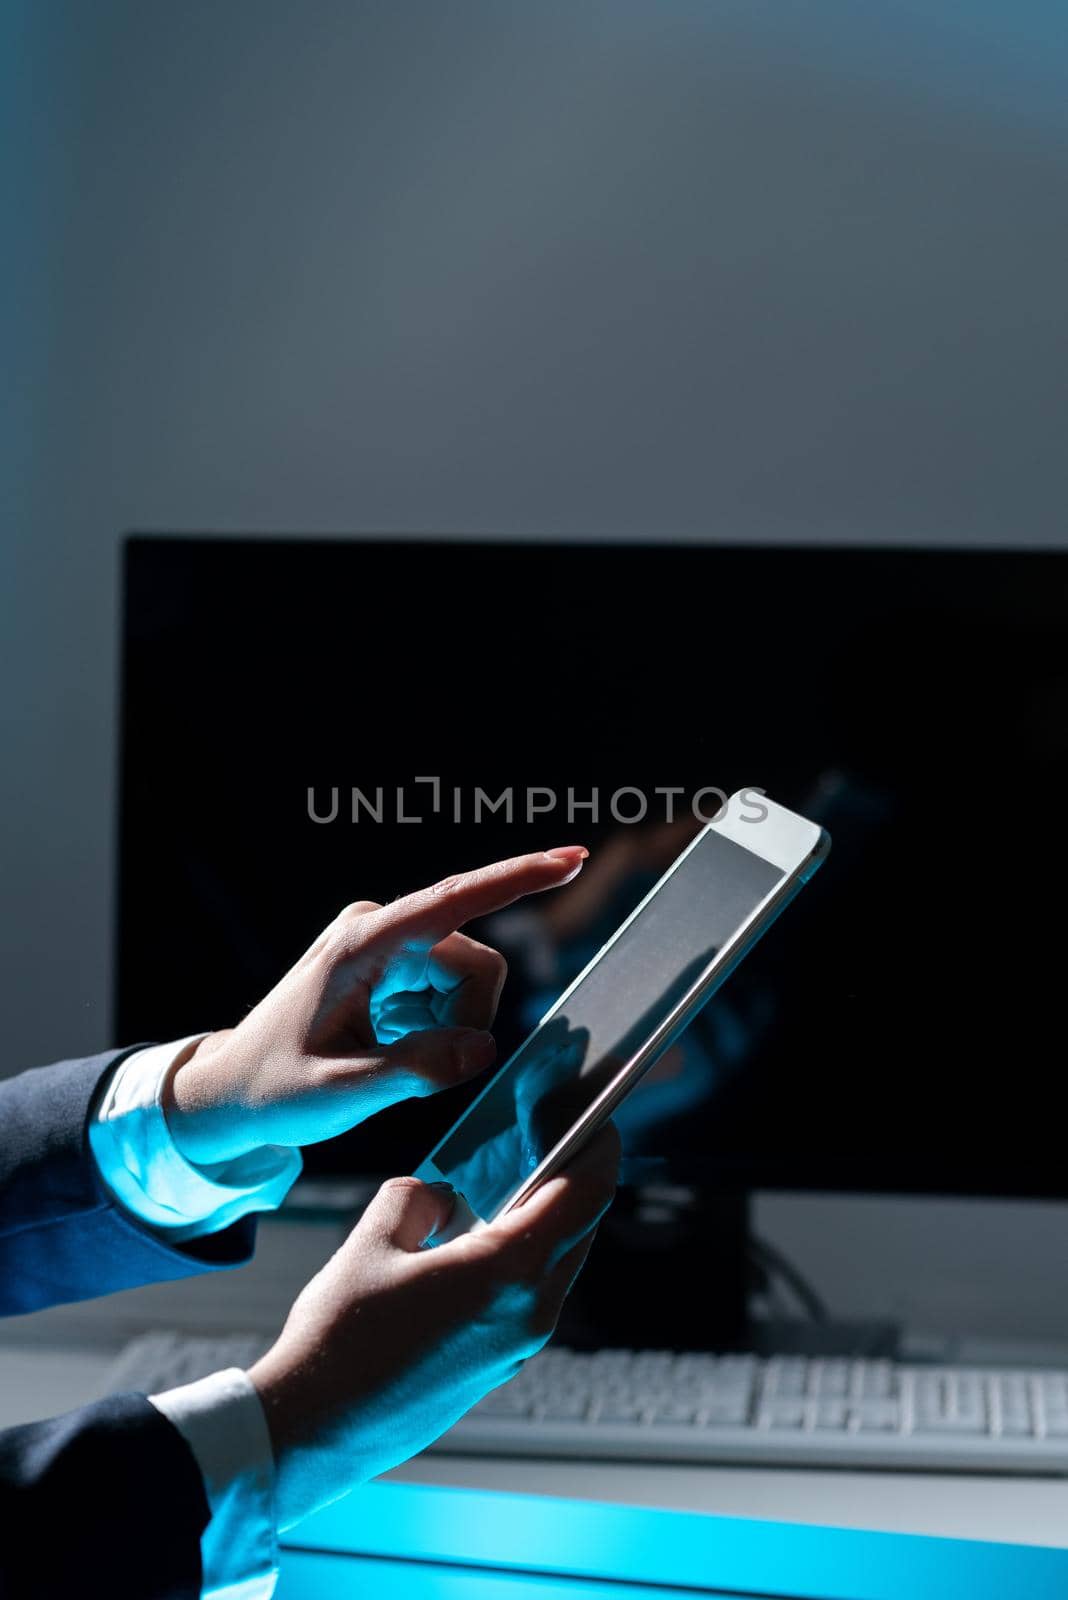 Businesswoman Holding Tablet And Pointing With One Finger On Important Message. Executive In Suit Presenting Crutial Information. Woman Showing Critical Announcement. by nialowwa